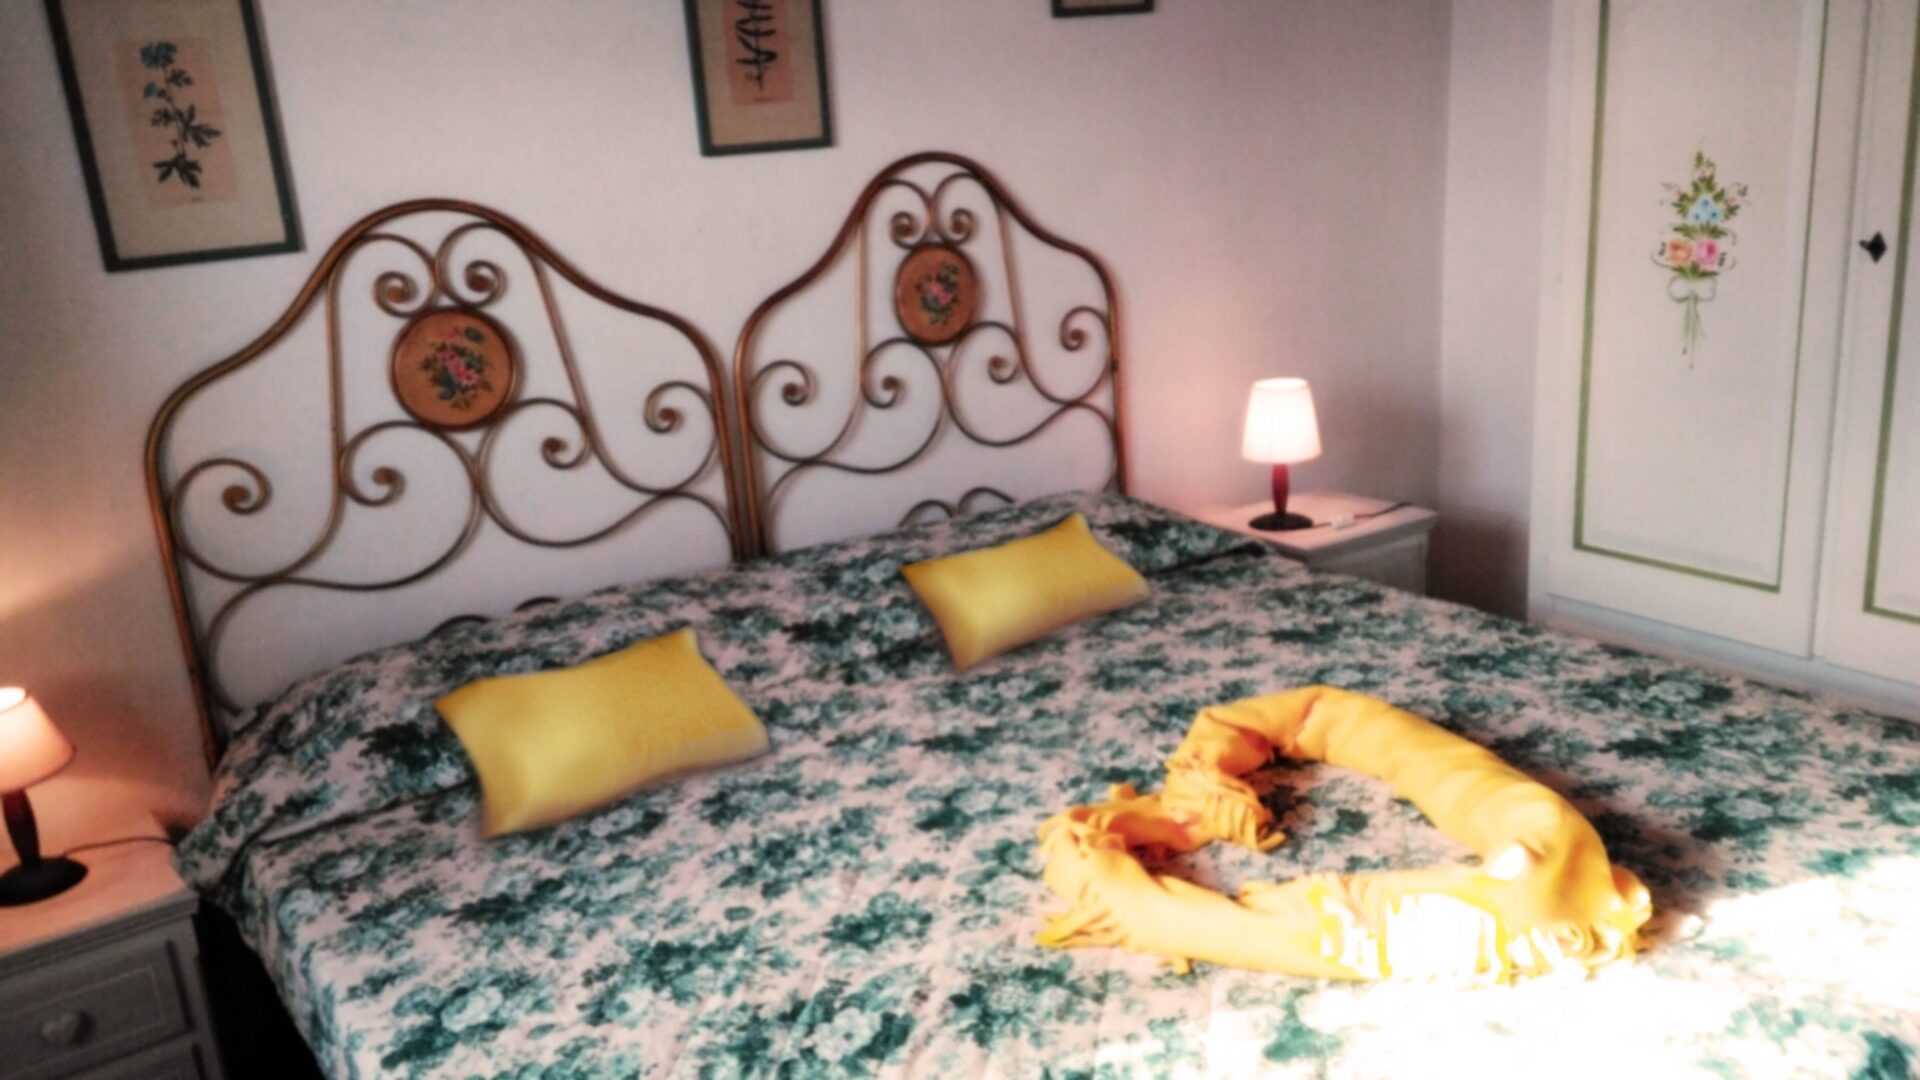 A bed with yellow pillows and green sheets.